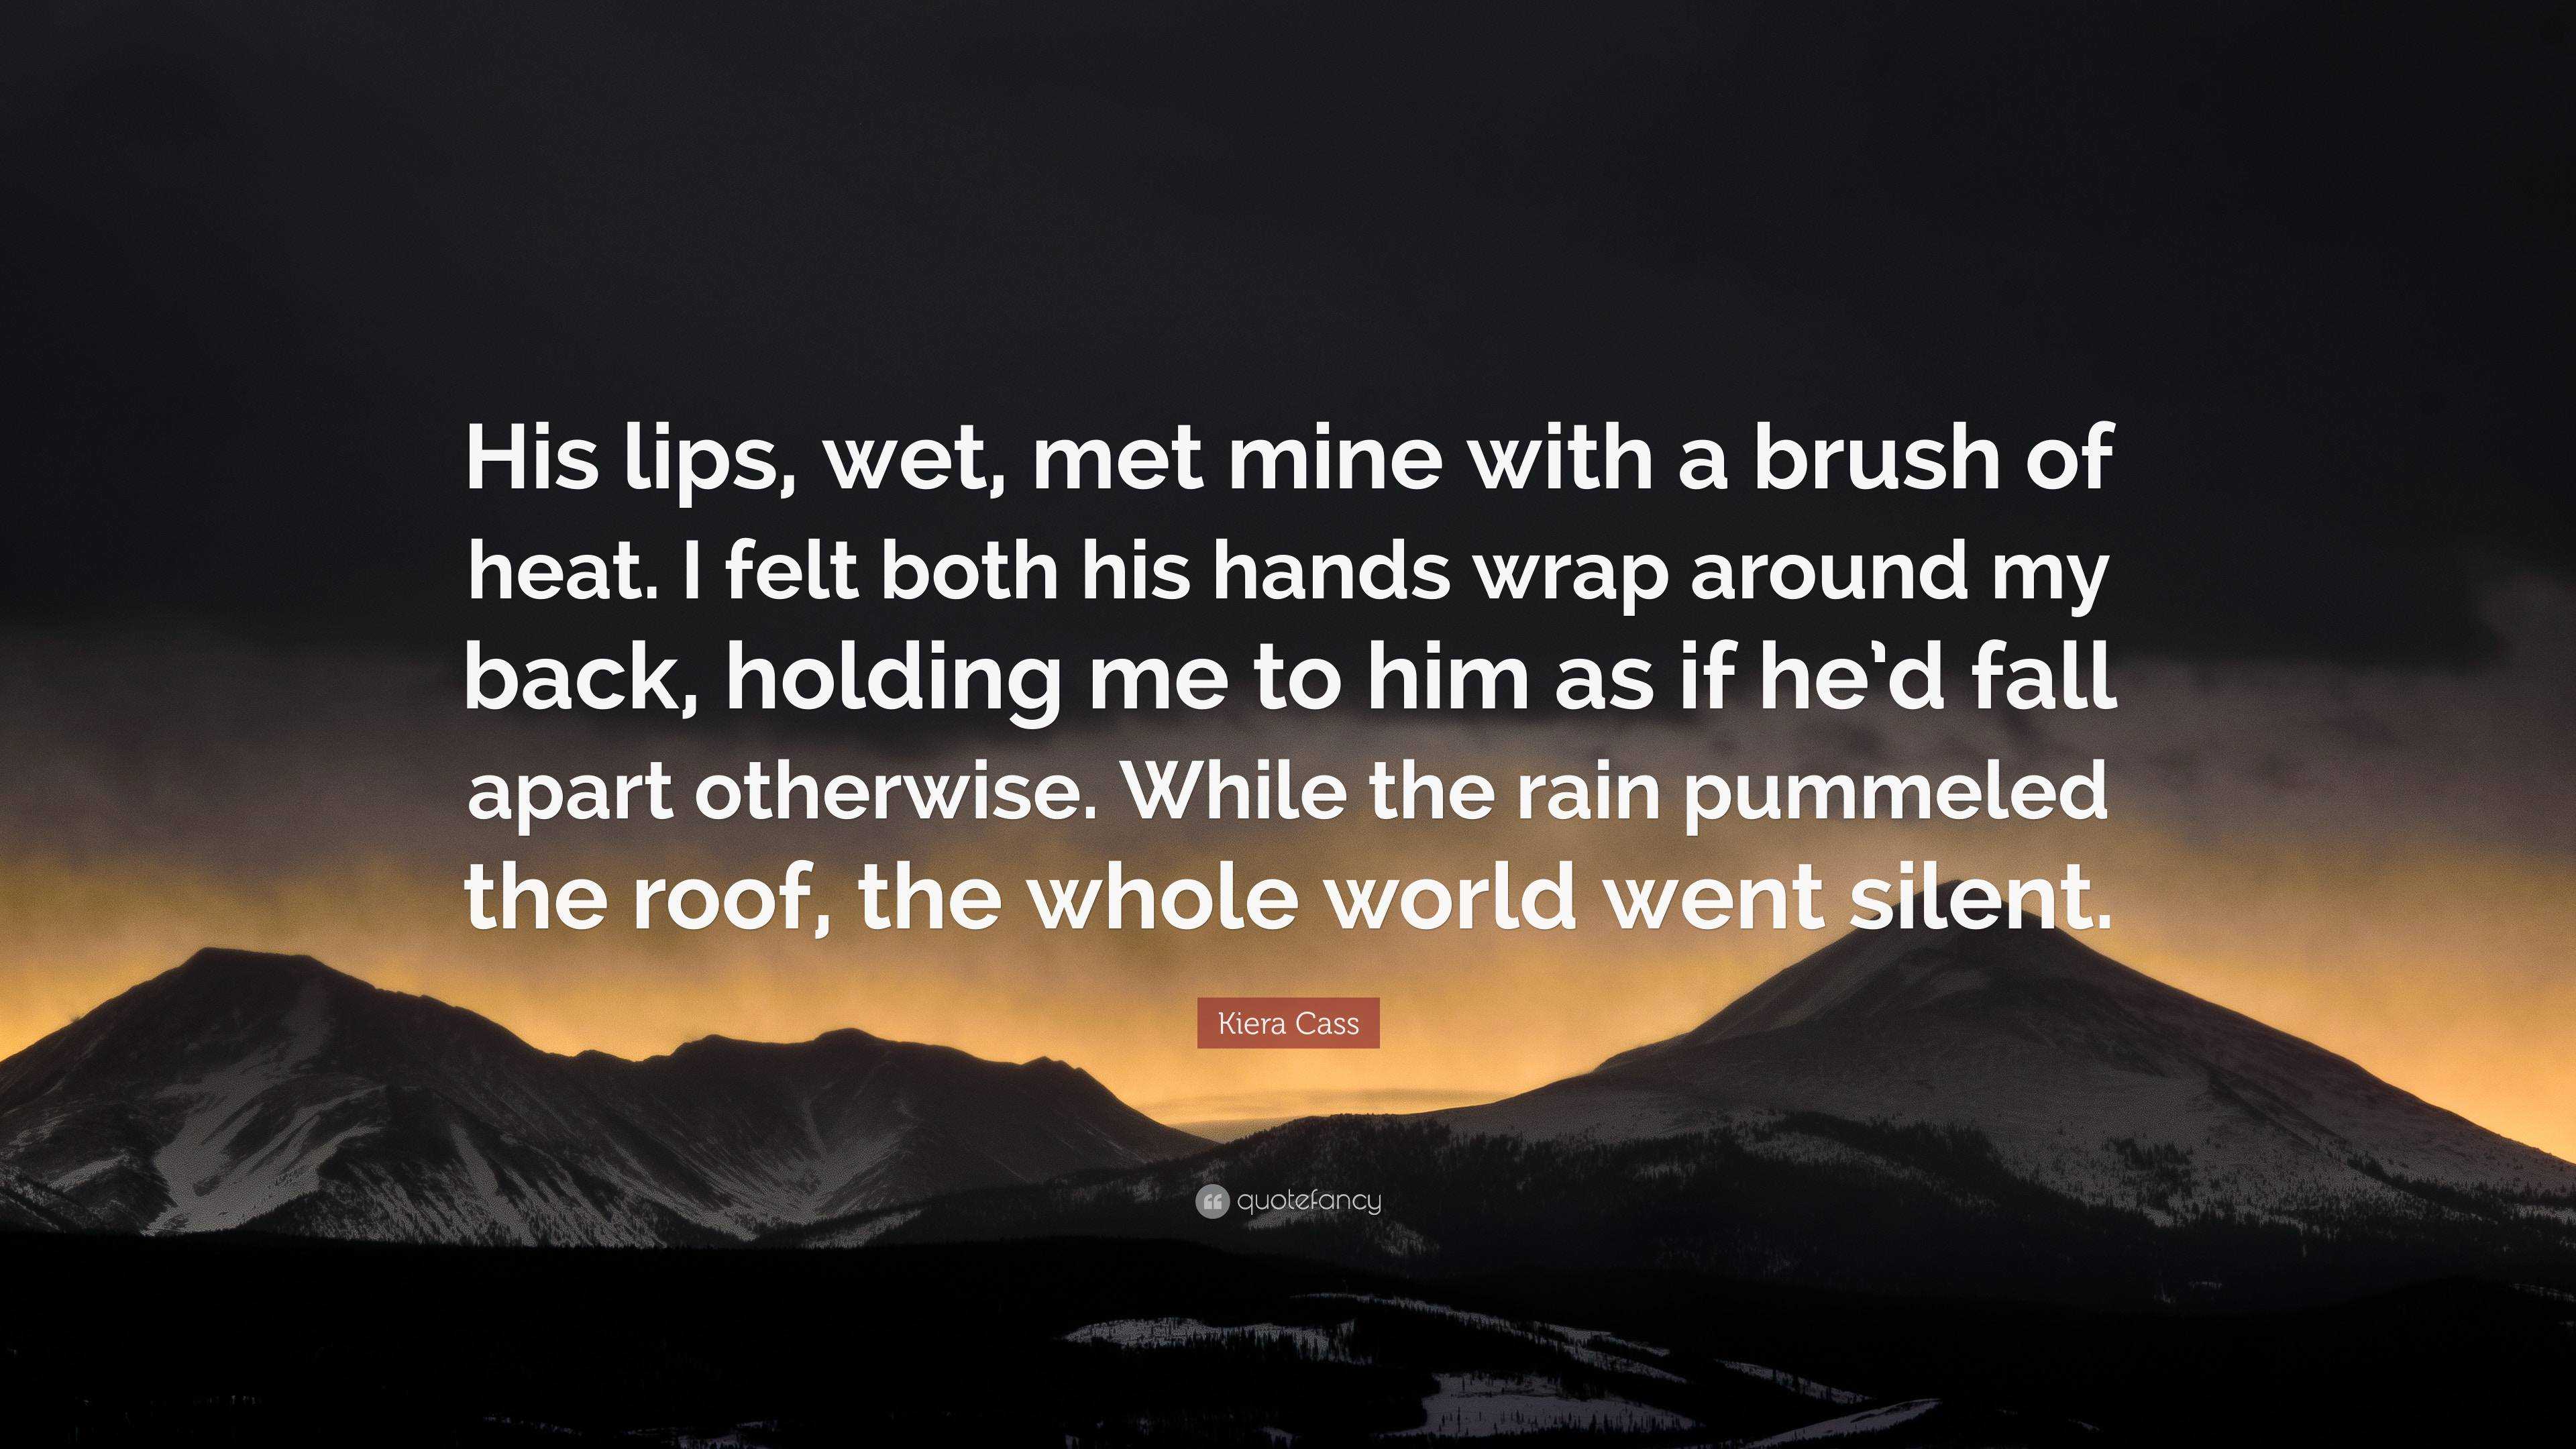 Kiera Cass Quote: “His lips, wet, met mine with a brush of heat. I